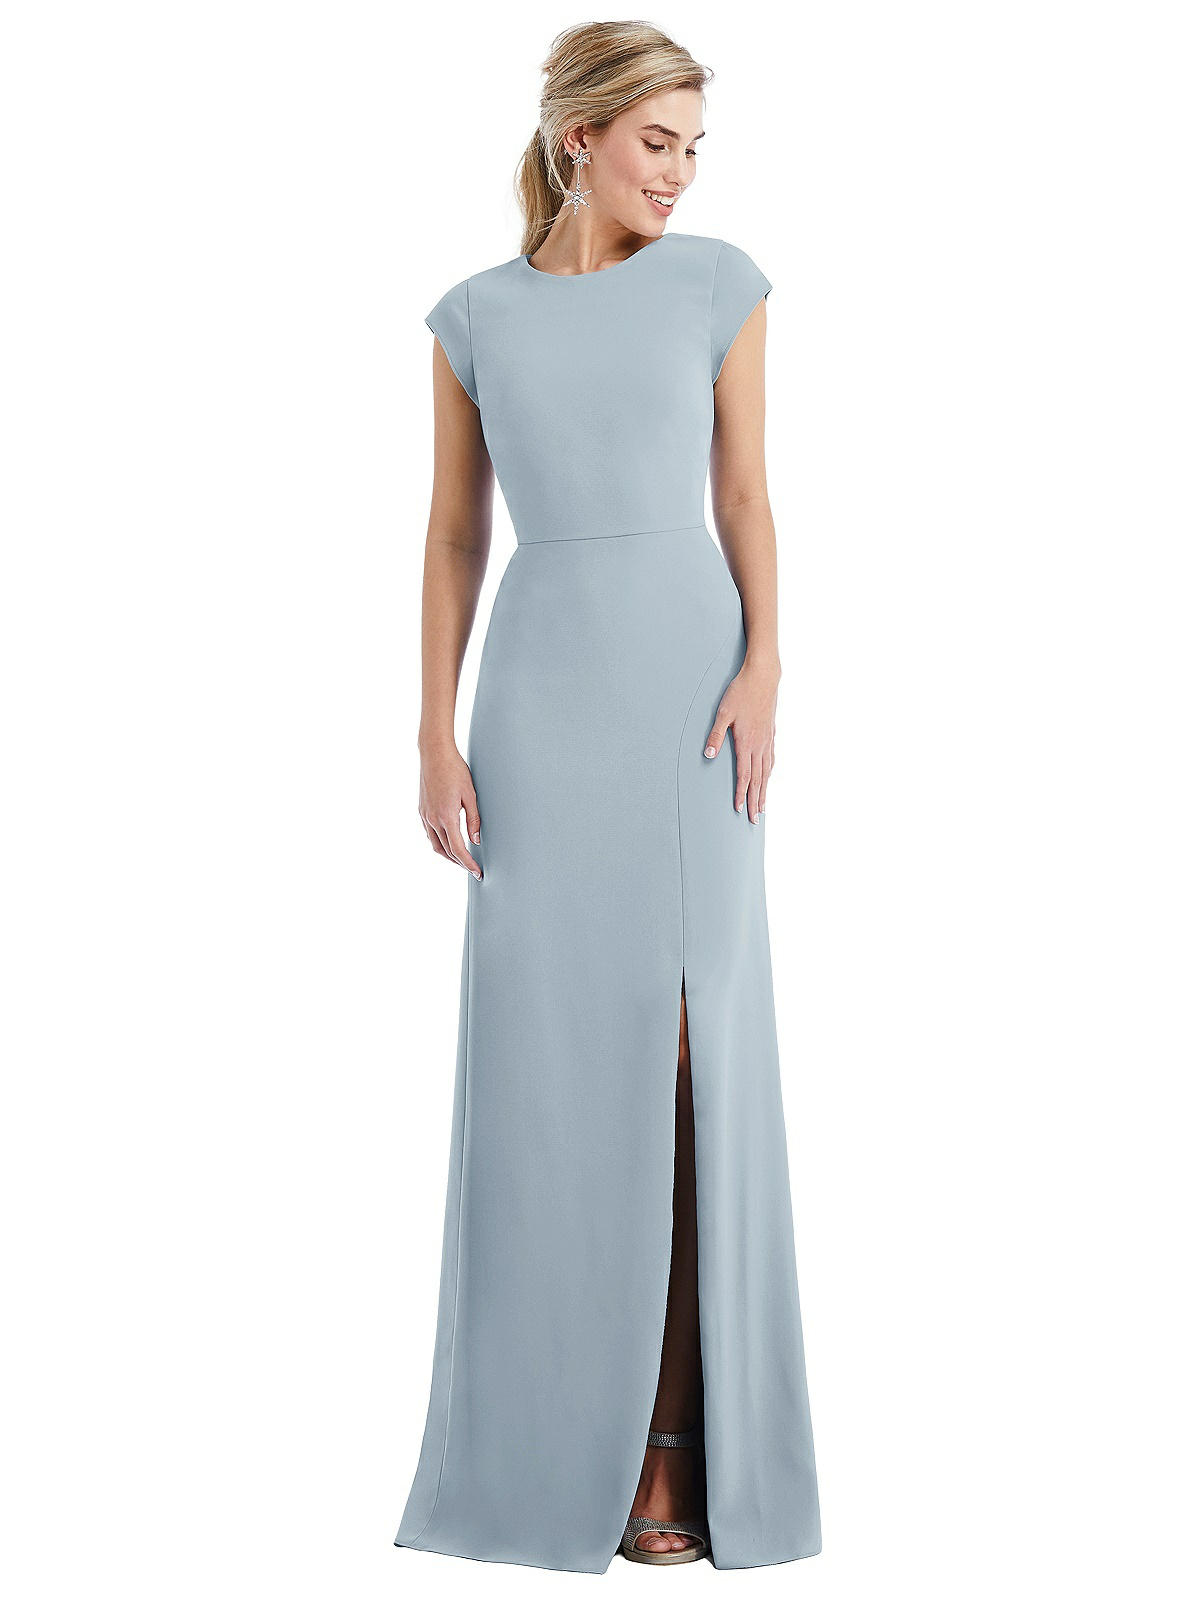 Fitted Stretch Satin Gathered Waistband Dusty-Blue Evening Gown